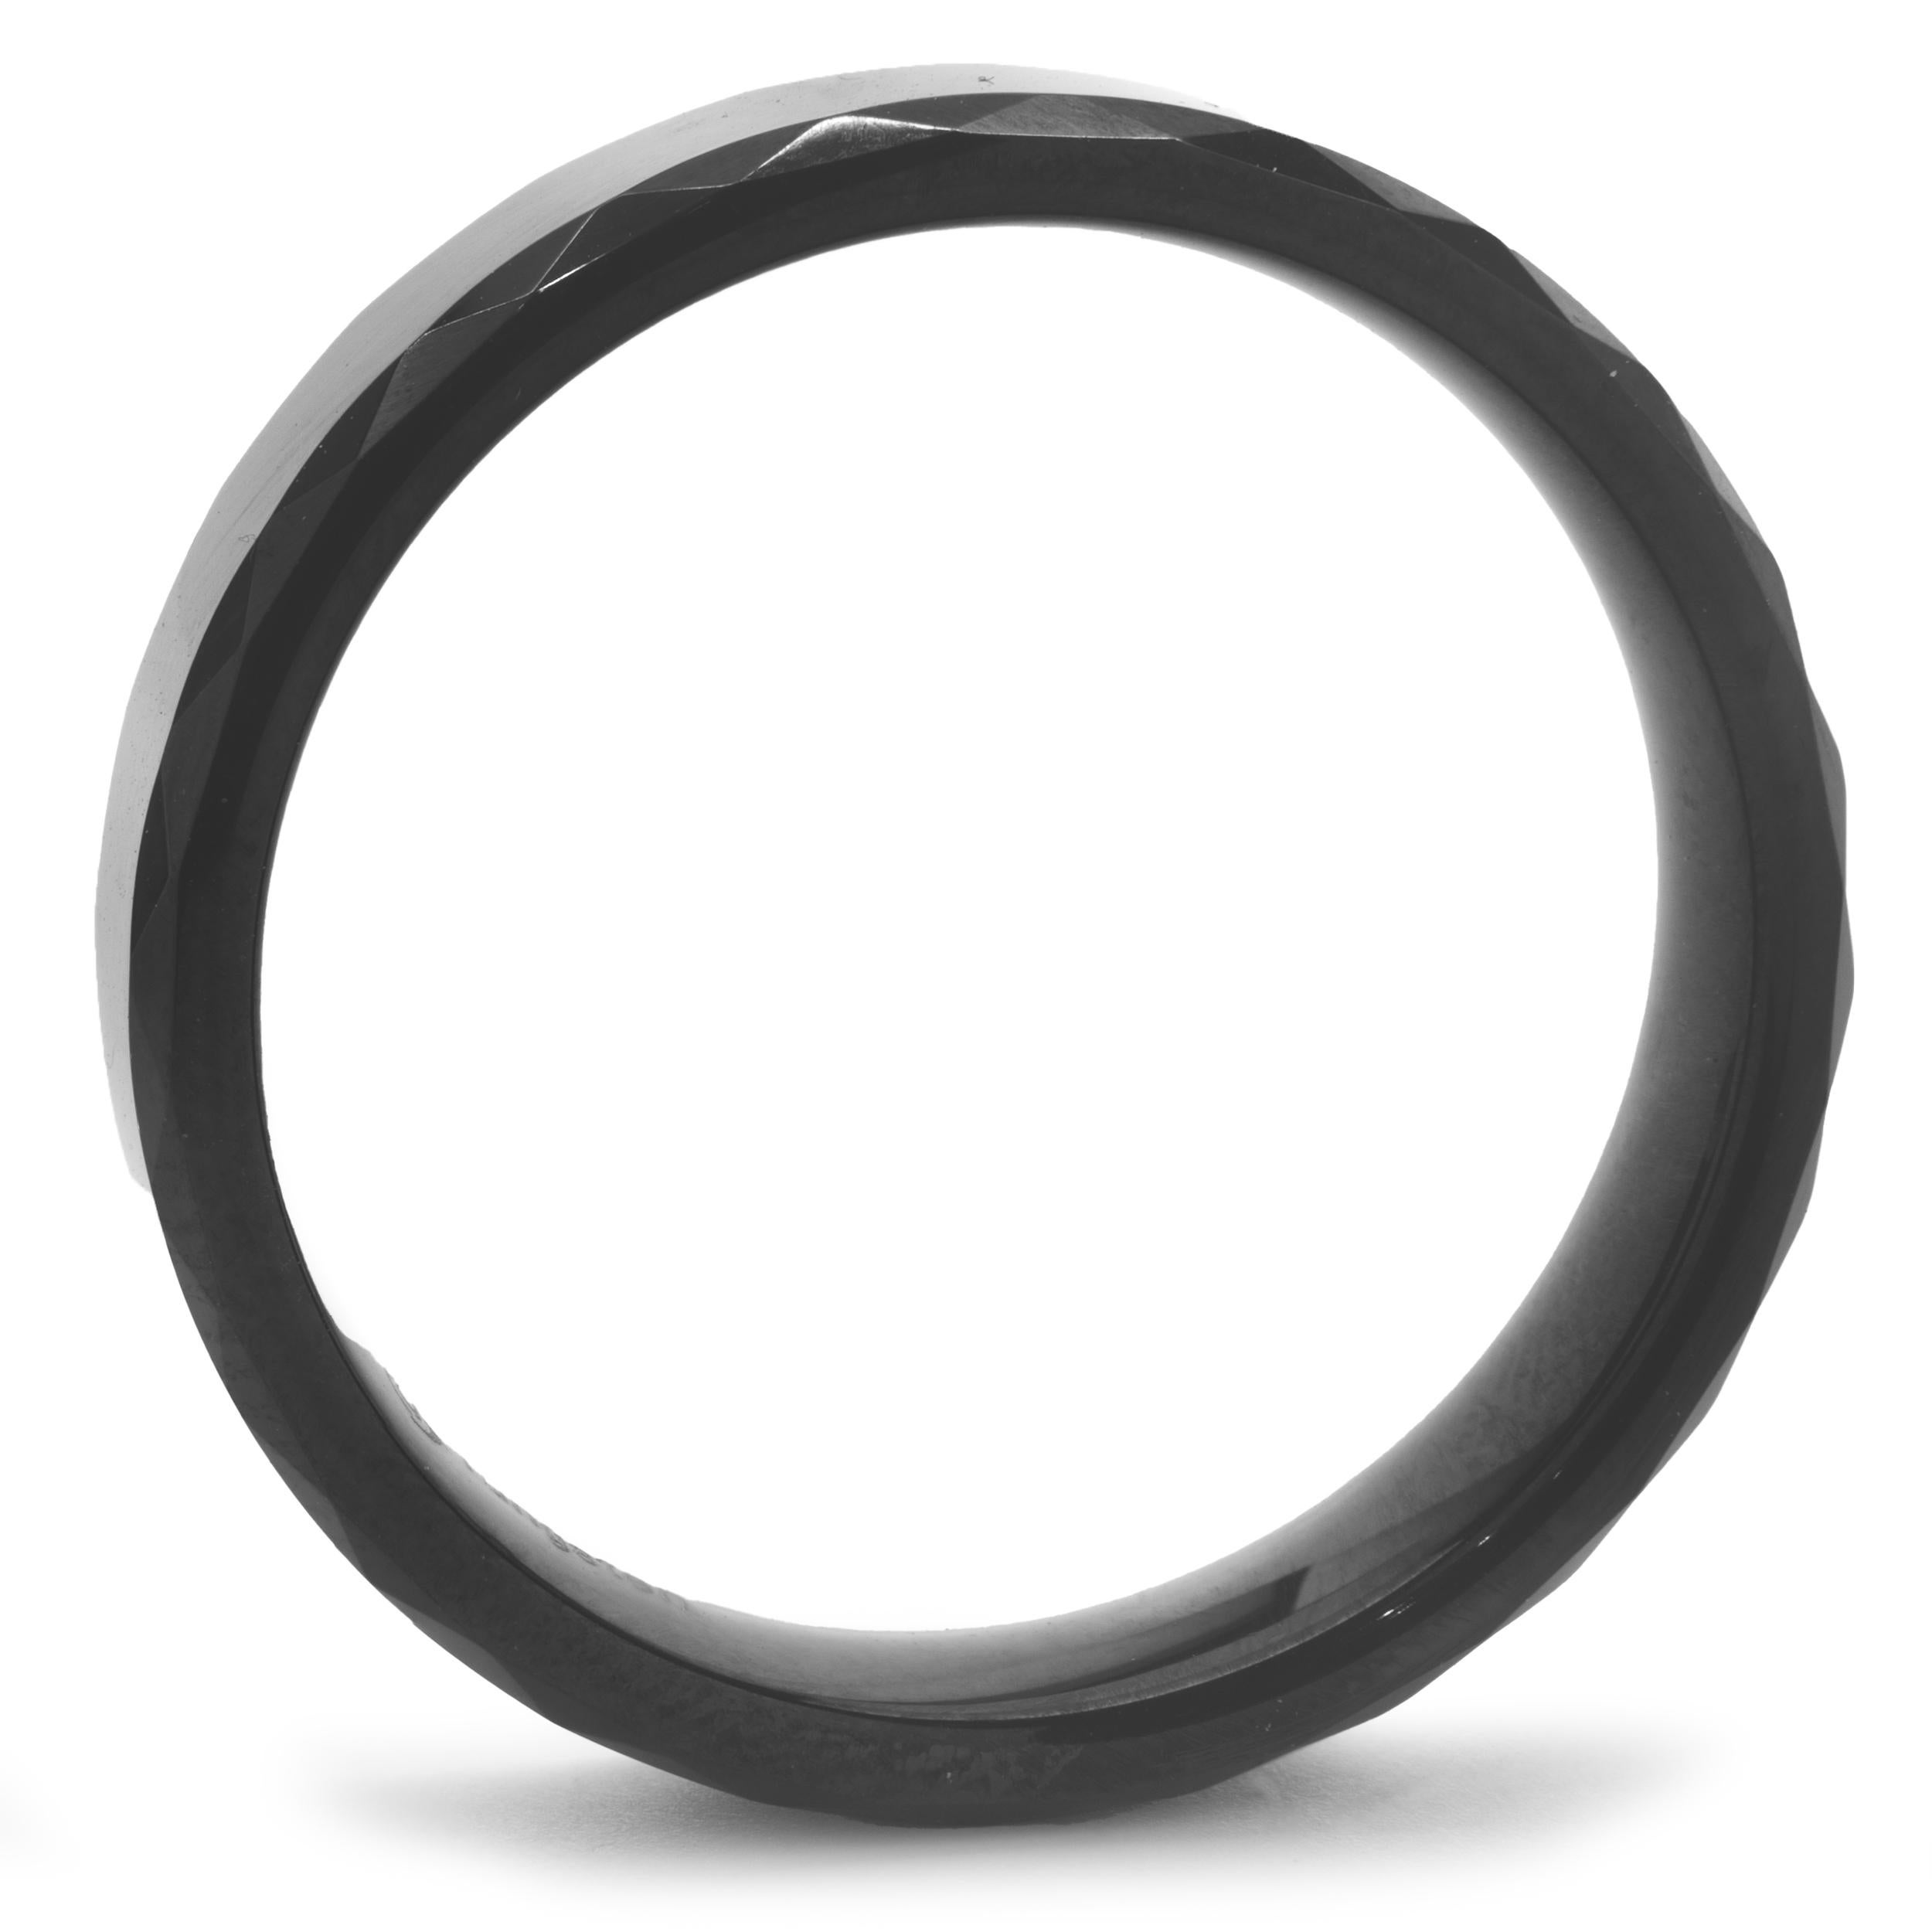 Designer: custom 
Material: Black Tungsten
Dimensions: band is 6mm wide 
Ring Size: 13
Weight: 12.95 grams
